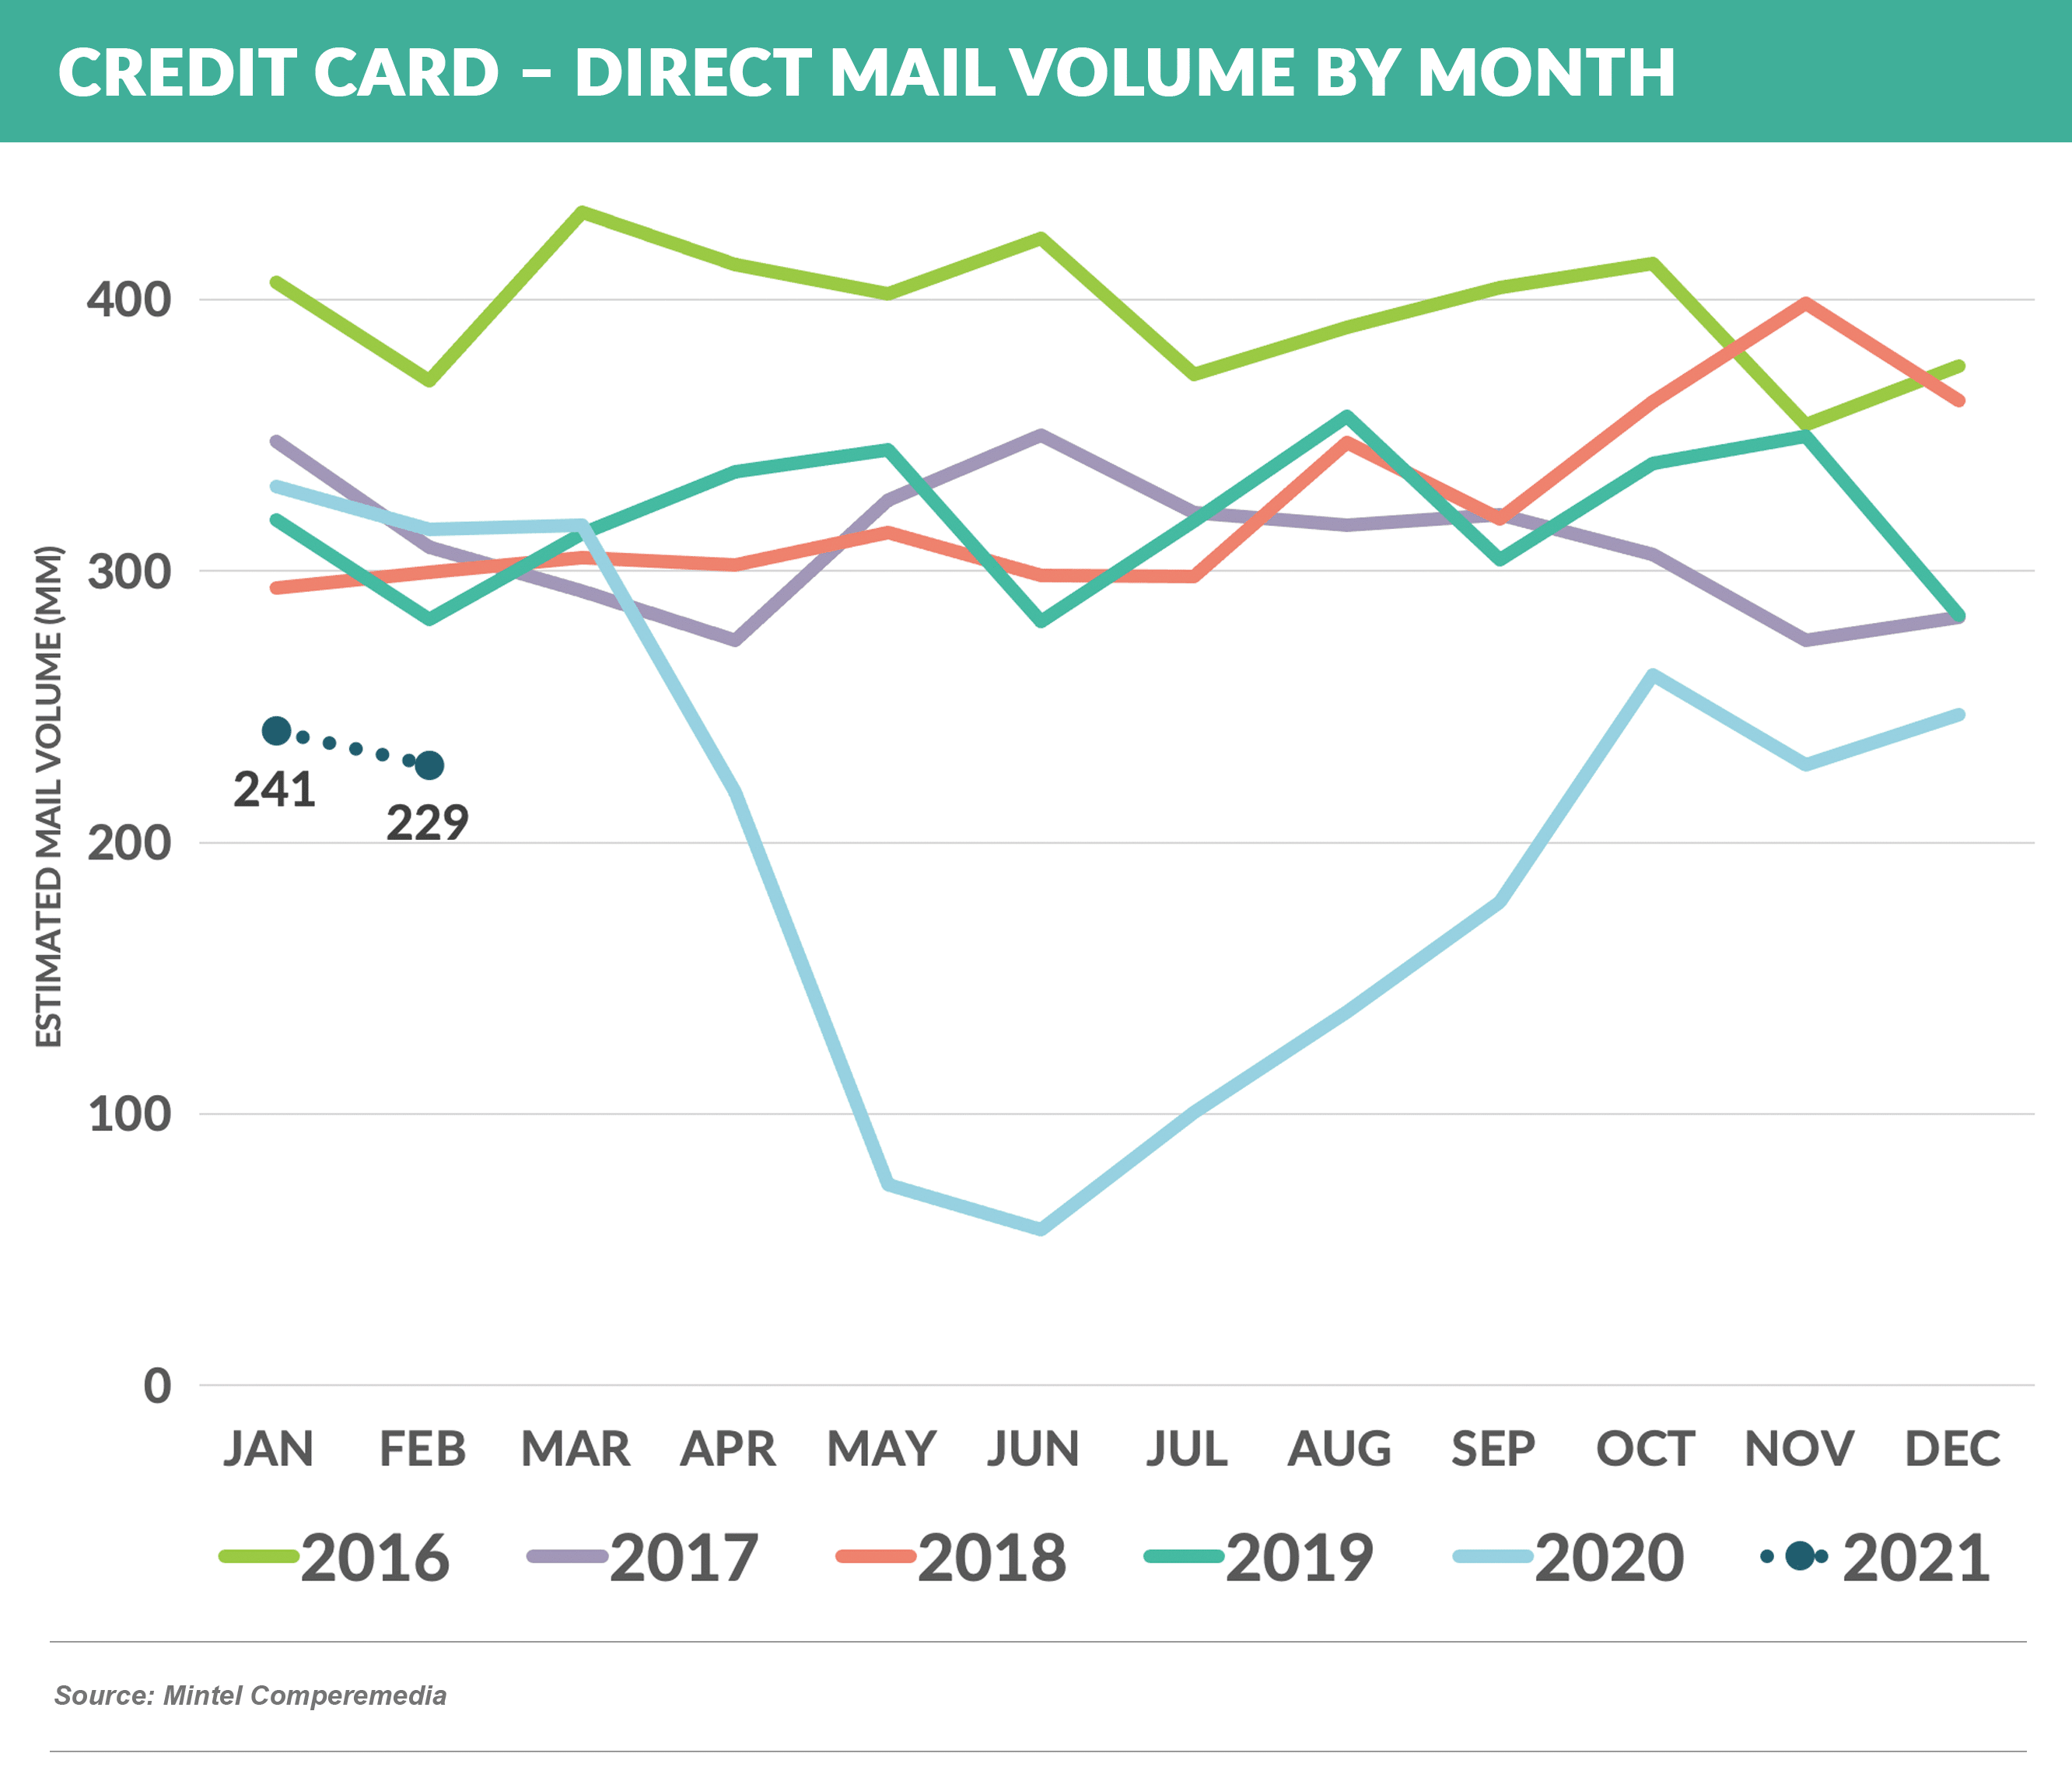 Credit Card – Direct Mail Volume by Month 20210403